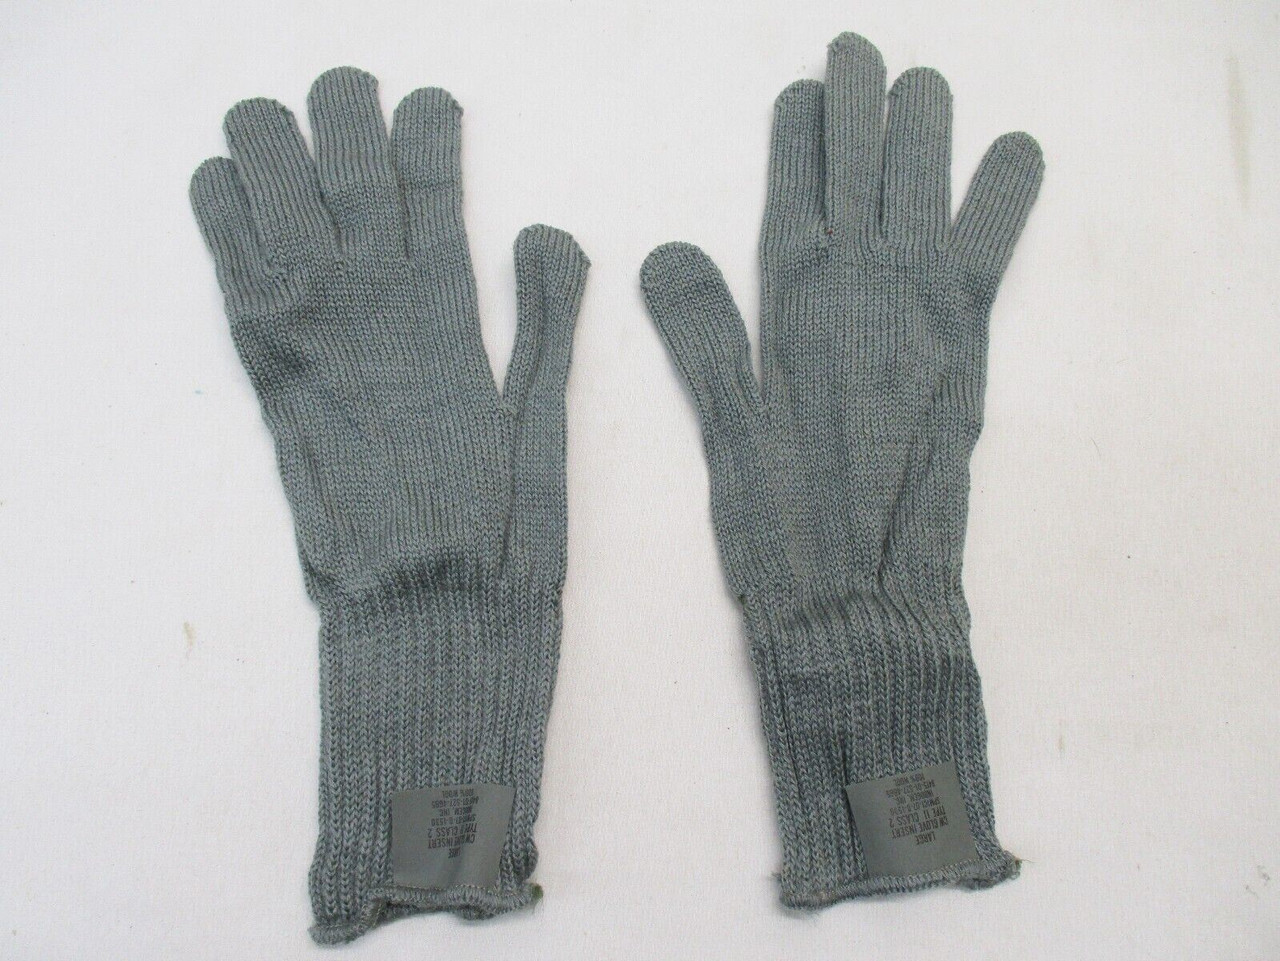 USGI ARMY ISSUE COLD WEATHER GLOVE INSERT 100% WOOL LINERS FOLIAGE GREEN/GREY